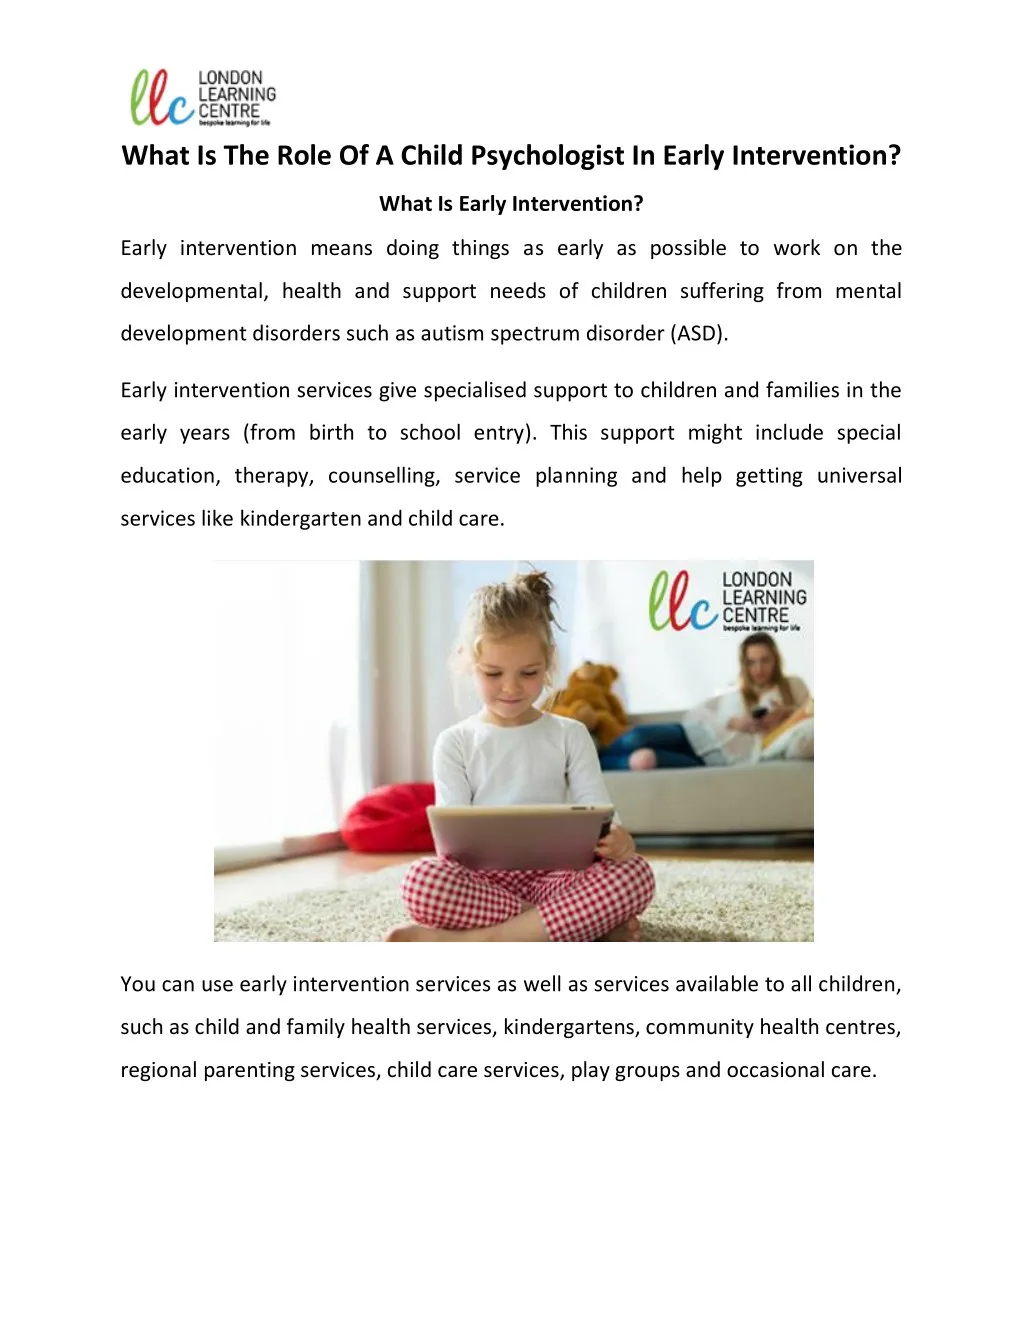 what is the role of a child psychologist in early